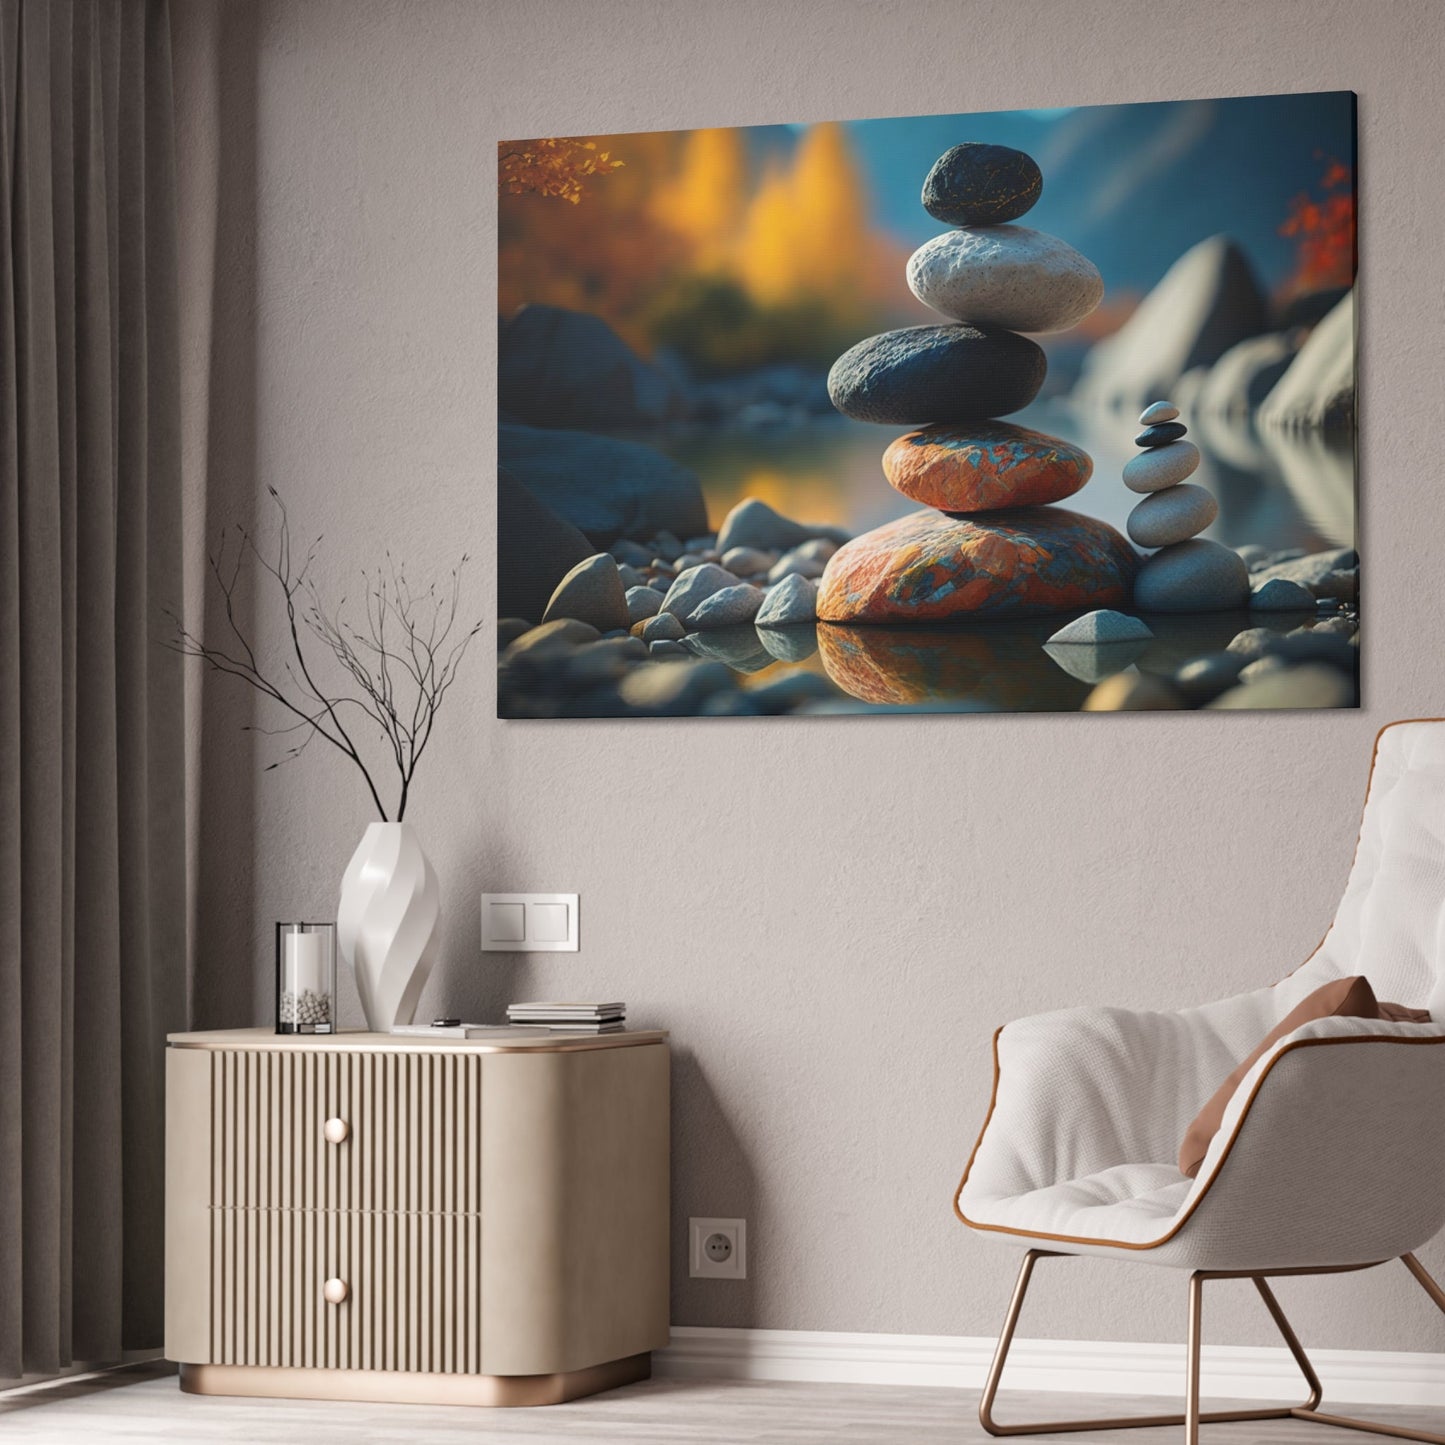 Tranquility Found: Natural Canvas Print of a Relaxing Retreat